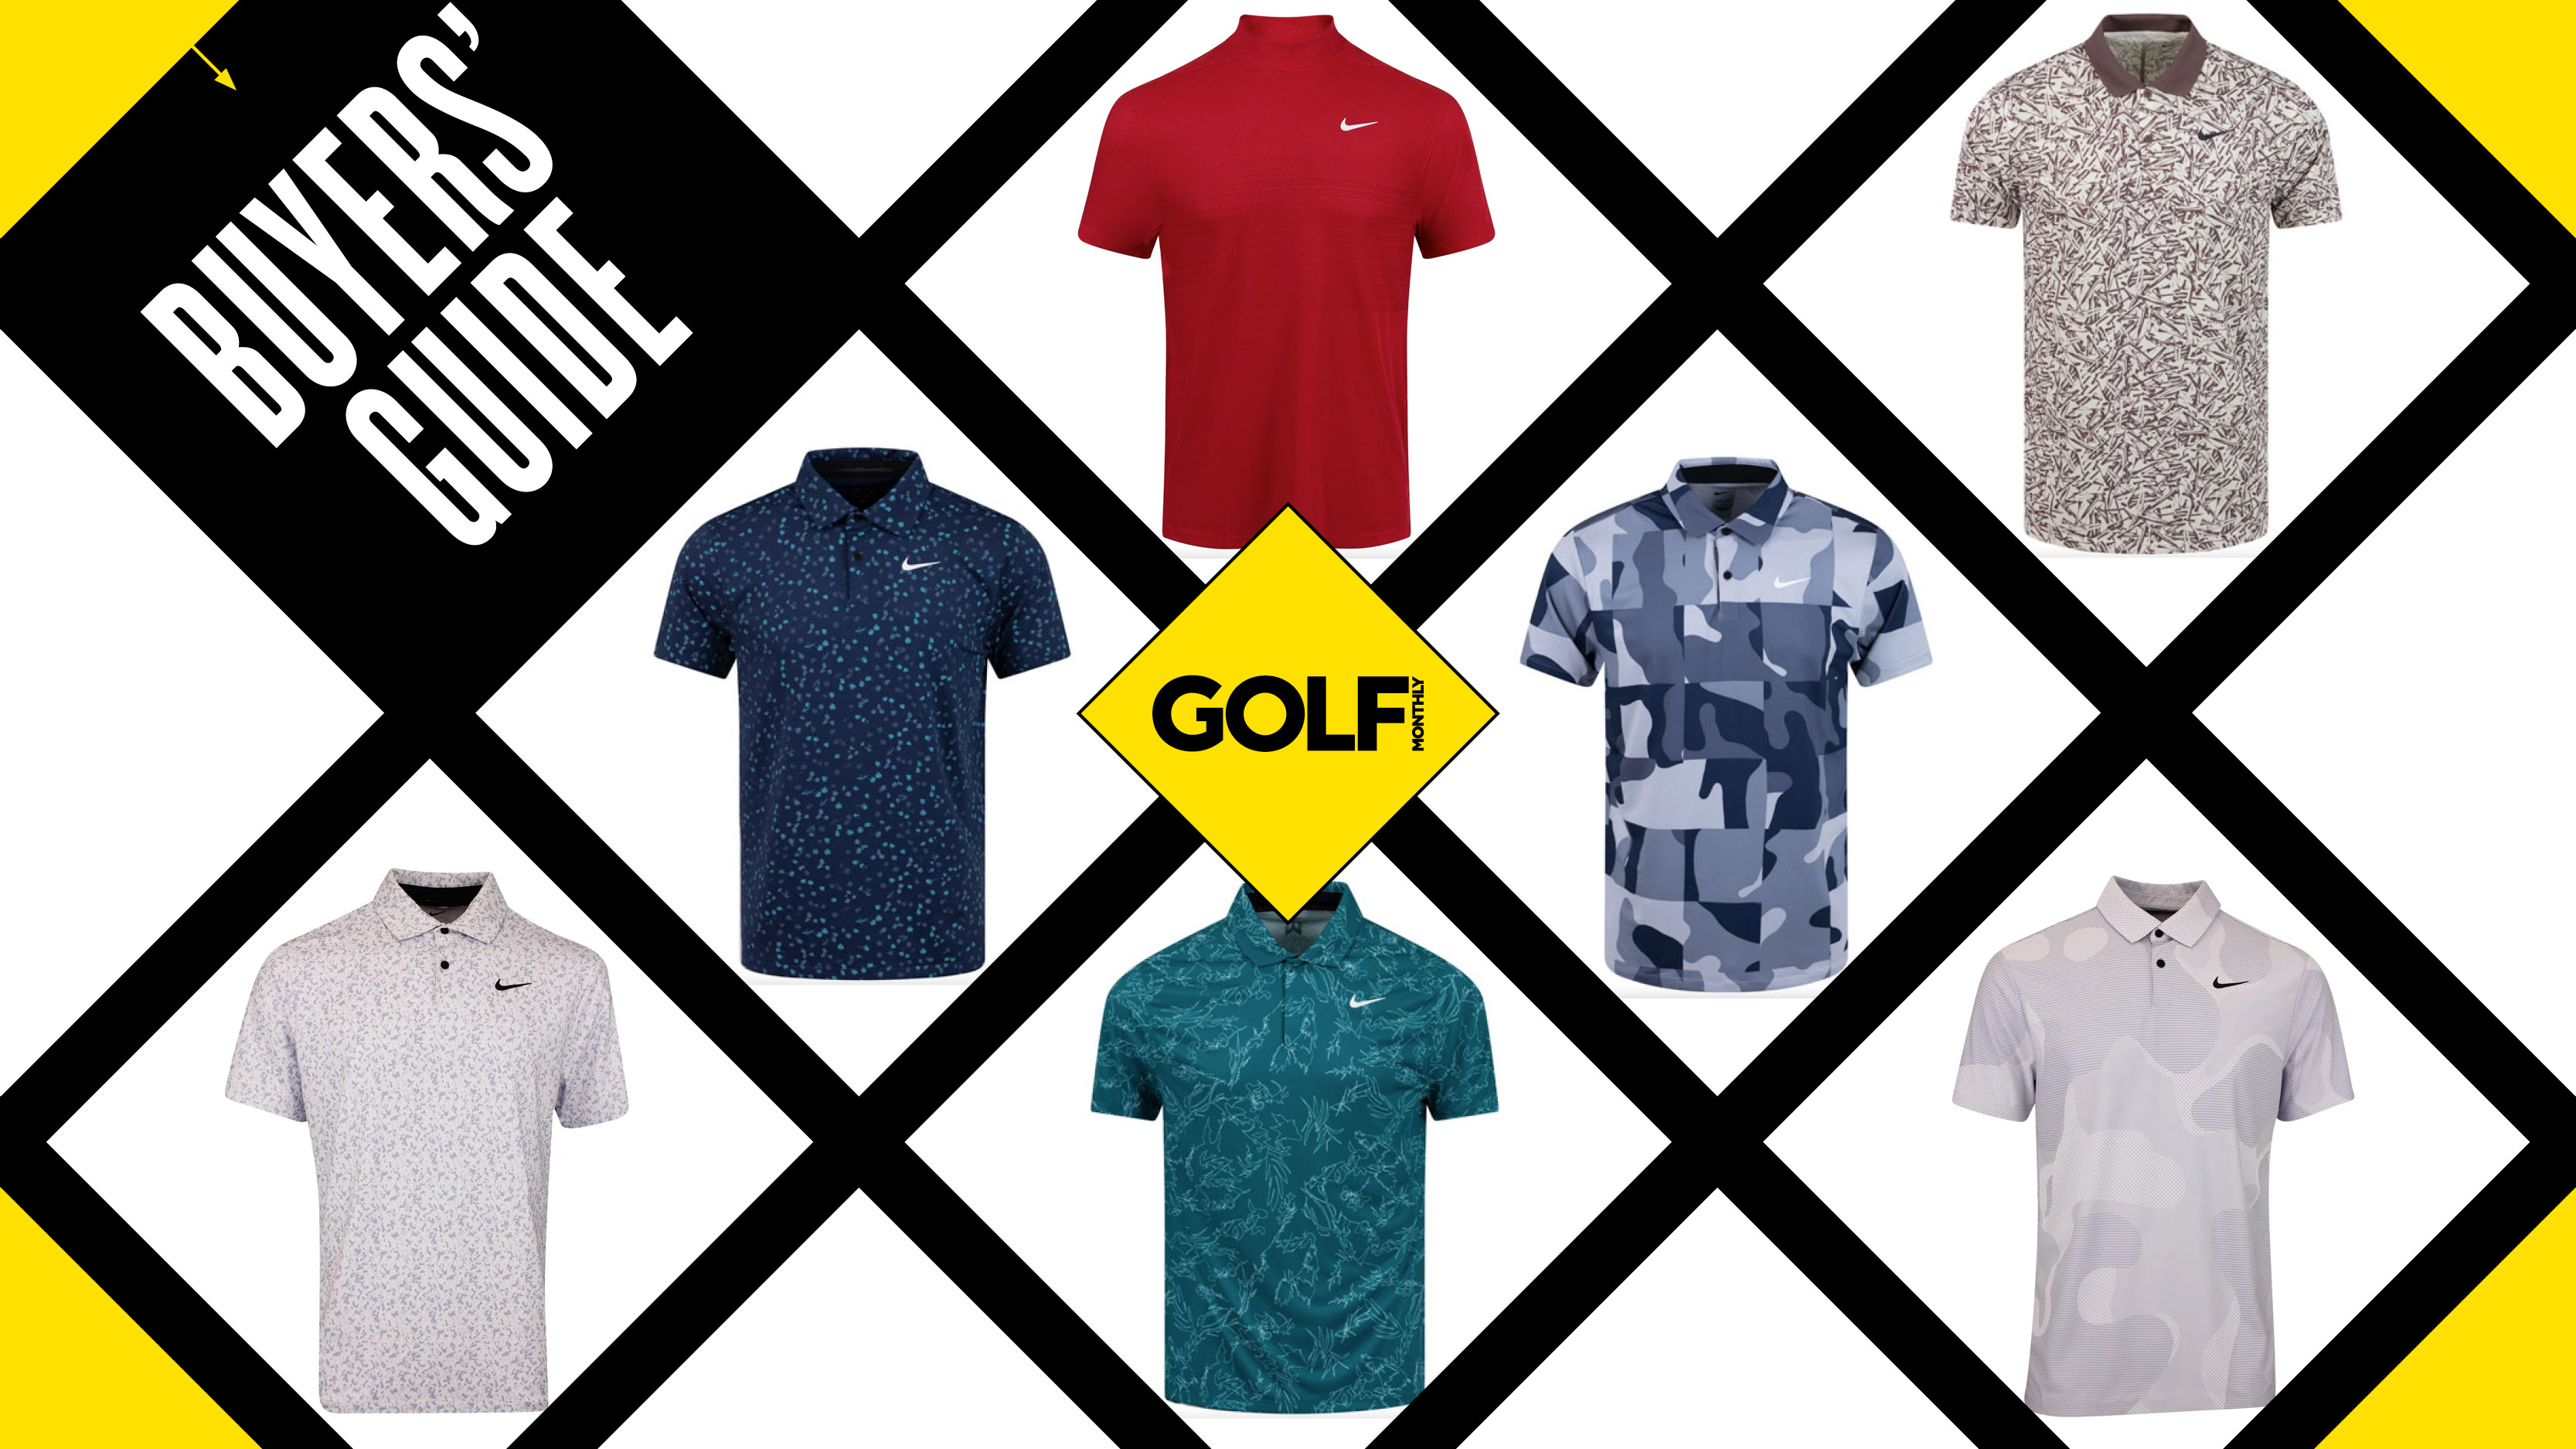 Nike Found a Clever New Spot for the Swoosh on Its Golf Shirts